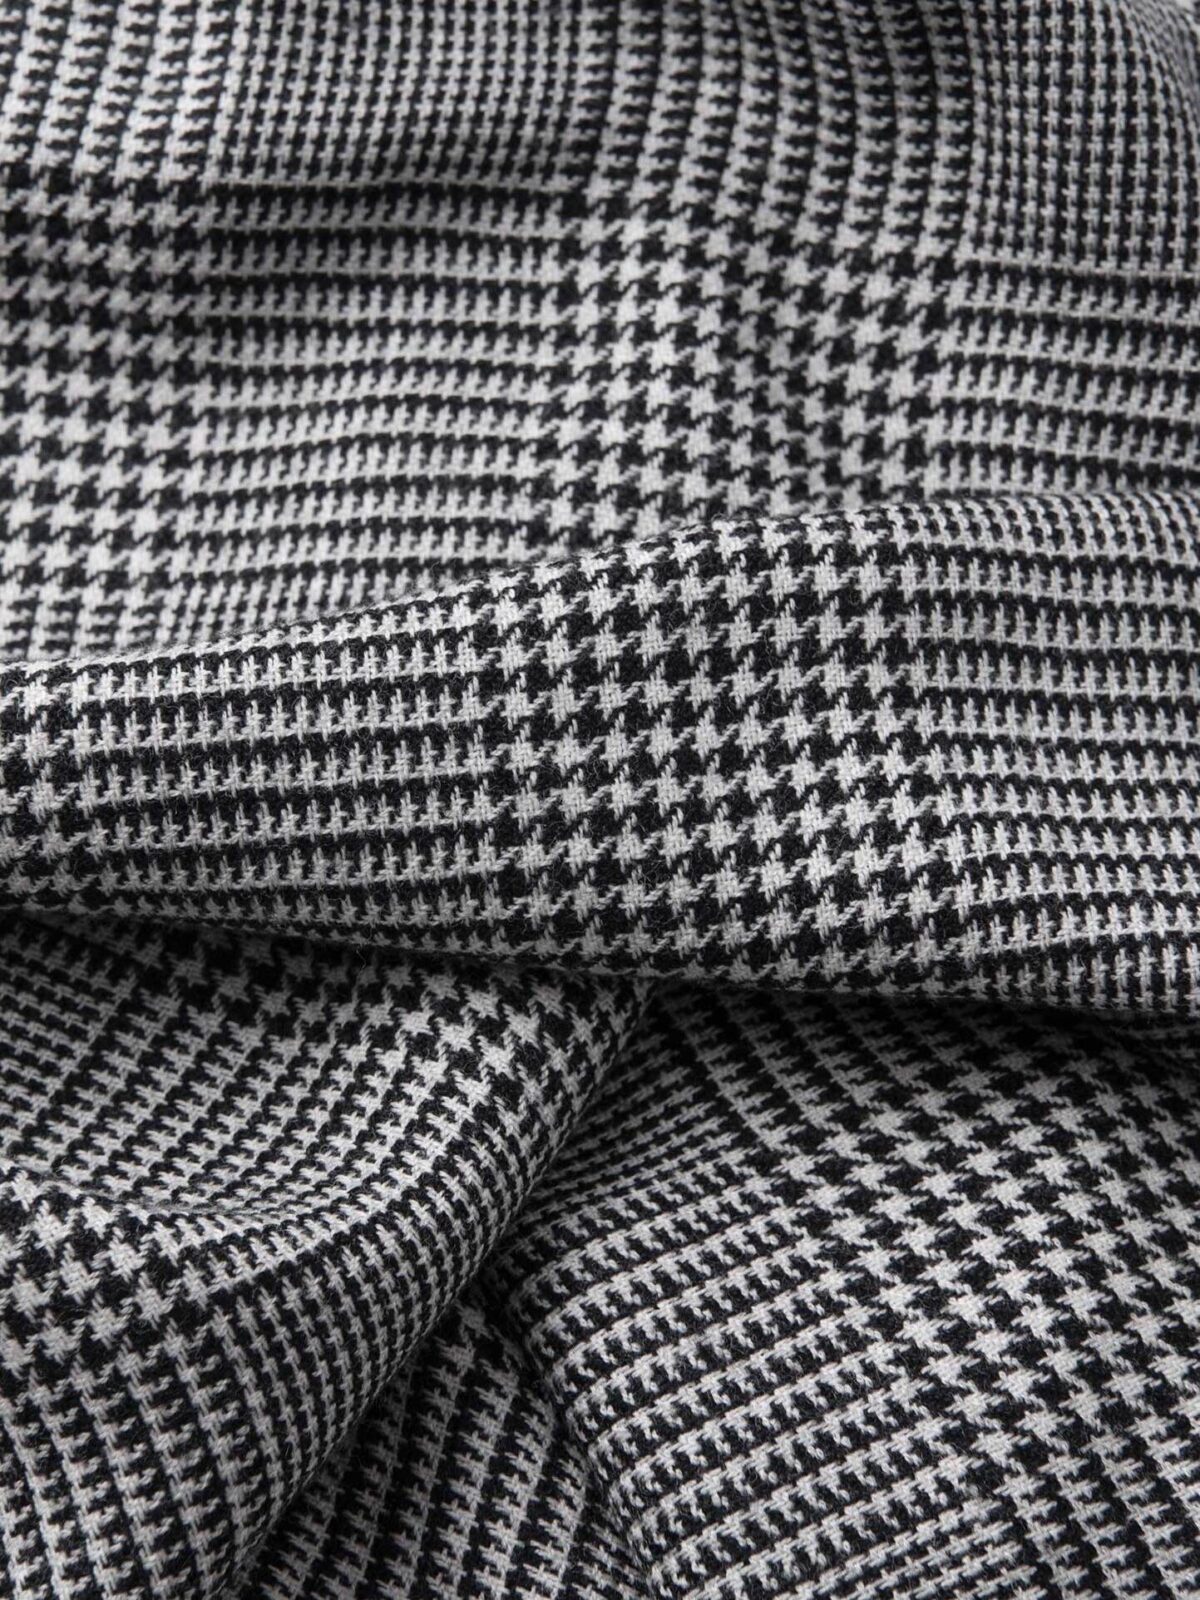 Black and White Glen Plaid Wool Scarf by Proper Cloth